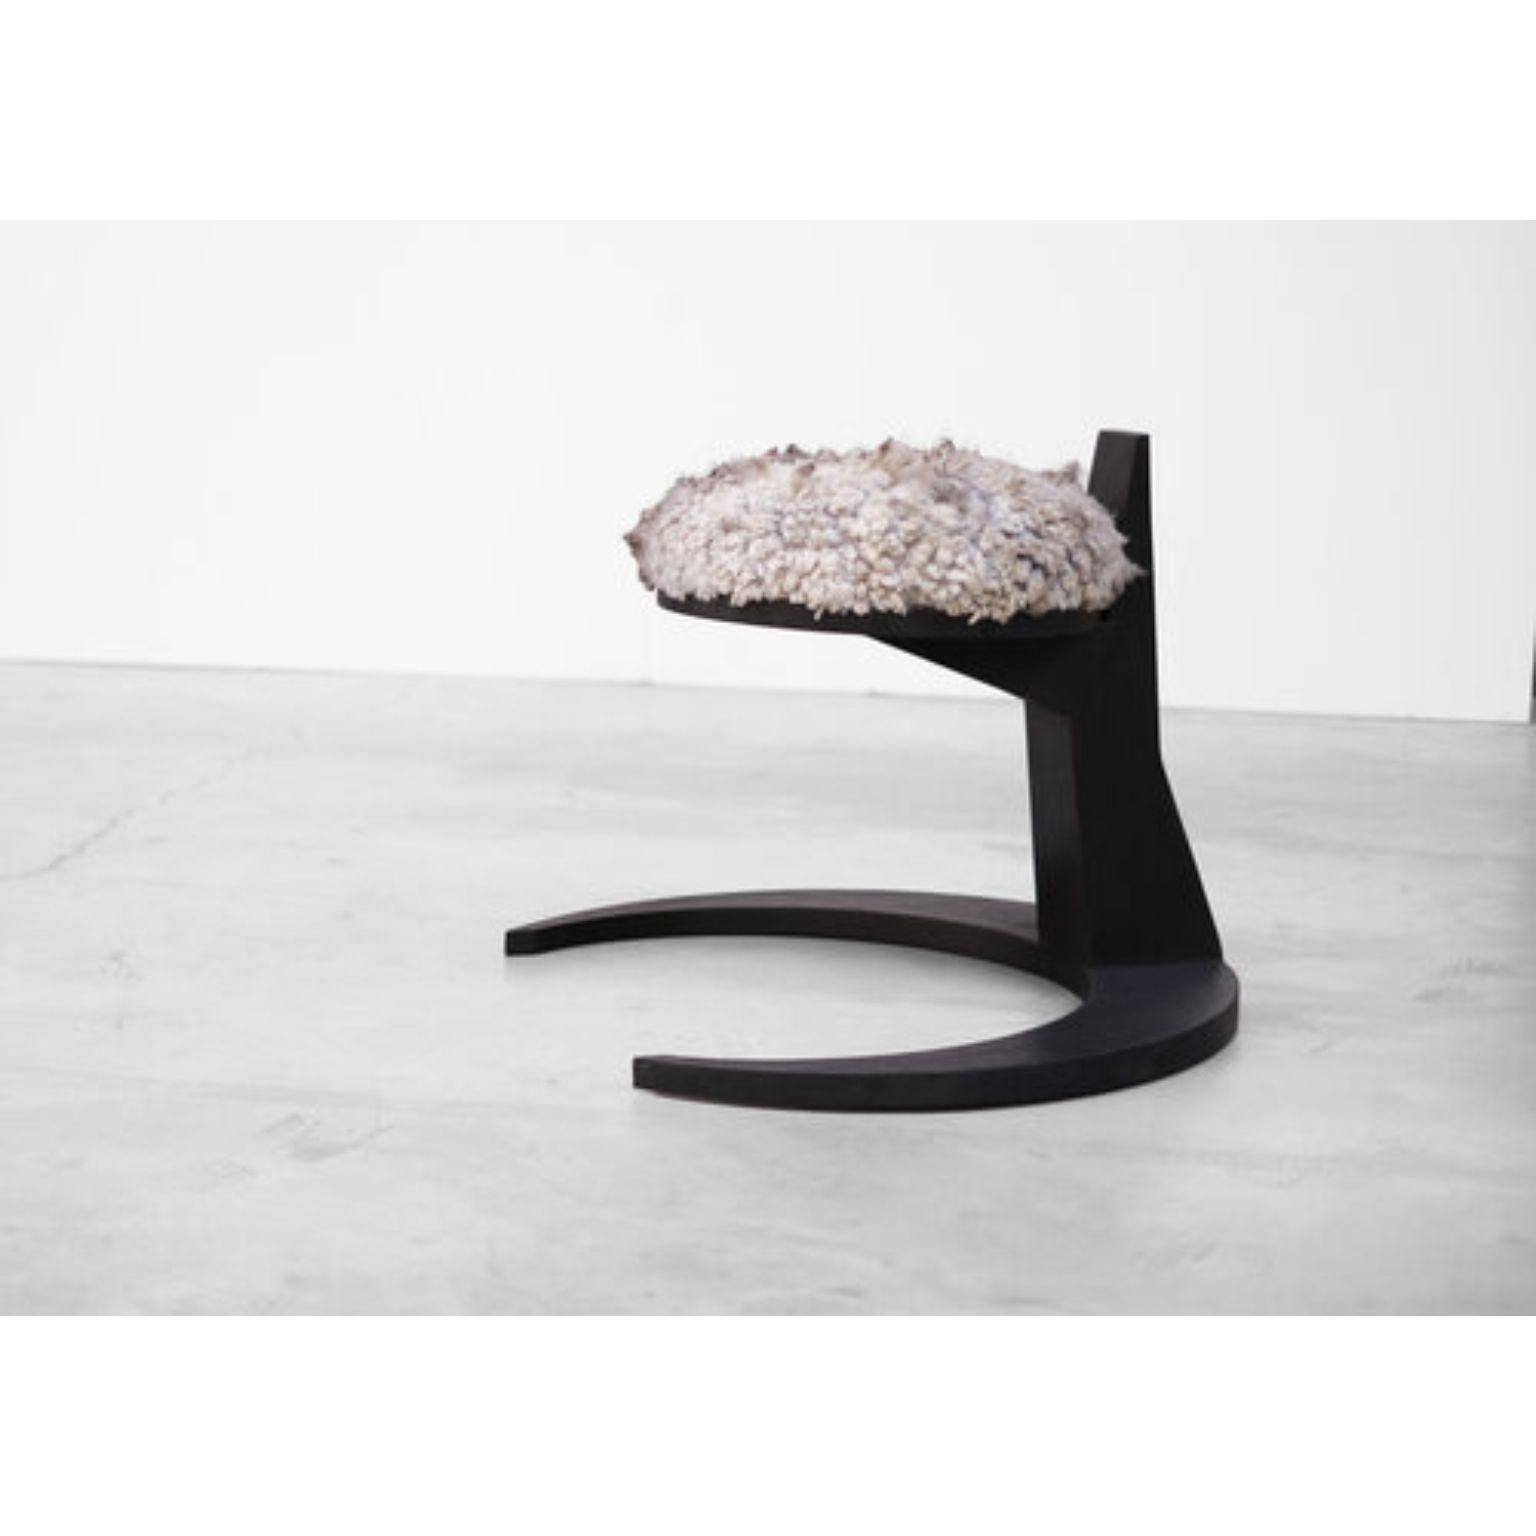 Hevioso stool - Arno Declercq
Burned and waxed Iroko wood finished with a sheep wool fixed seat. 
Other finishes and colors possible. 
Measures: 80 cm wide x 71 cm long x 60 cm high

Arno Declercq
Belgian designer and art dealer who makes bespoke